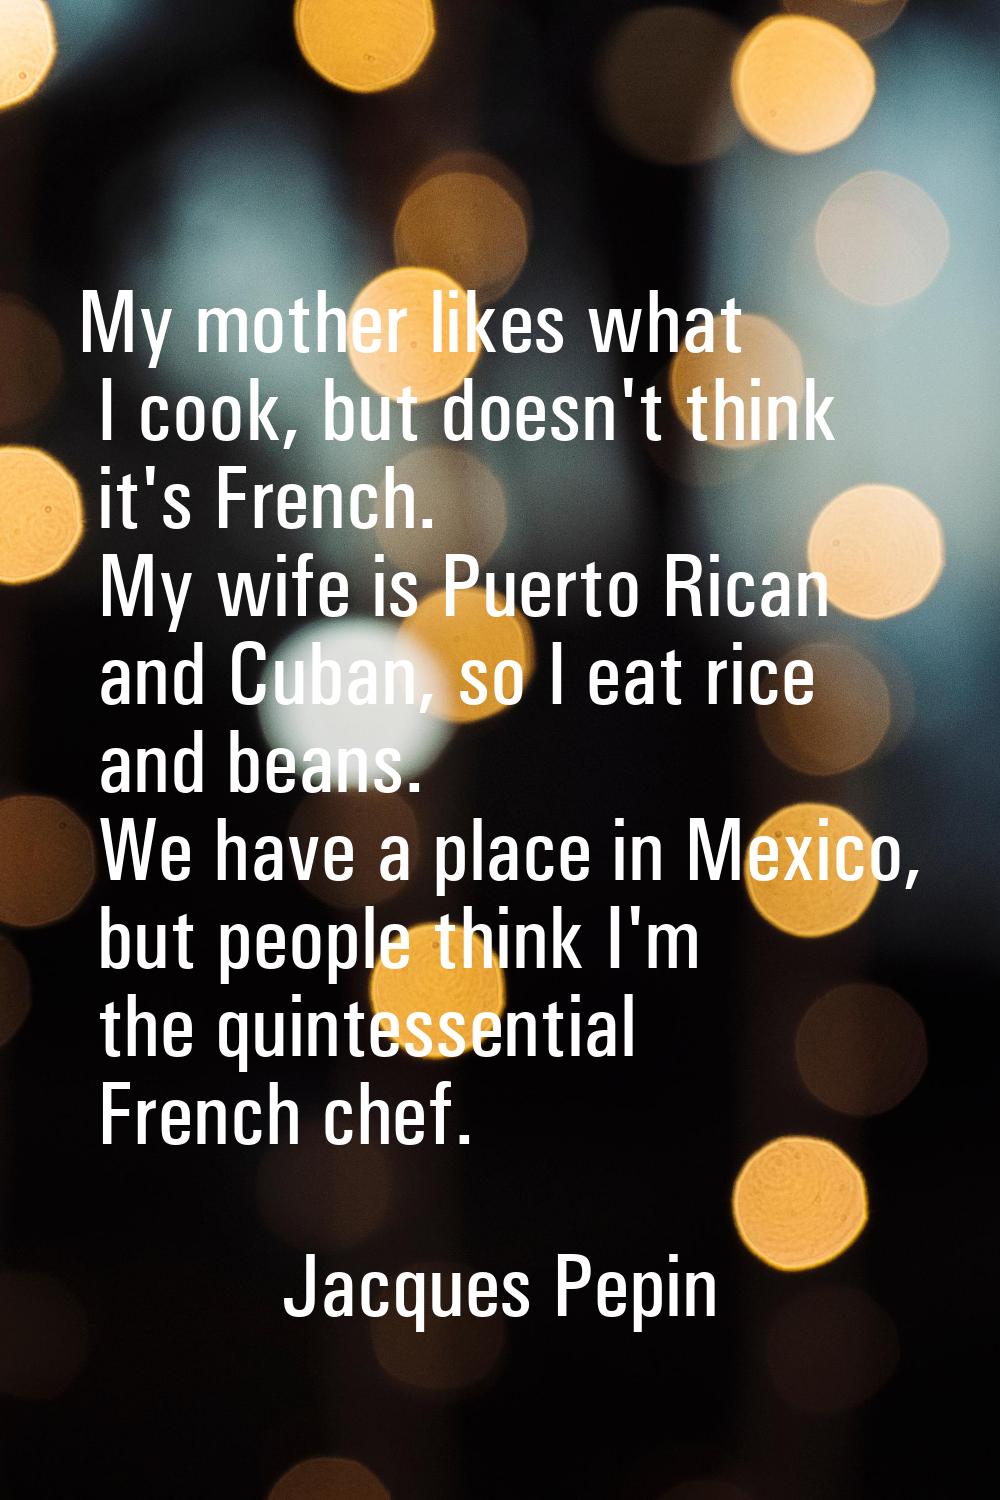 My mother likes what I cook, but doesn't think it's French. My wife is Puerto Rican and Cuban, so I